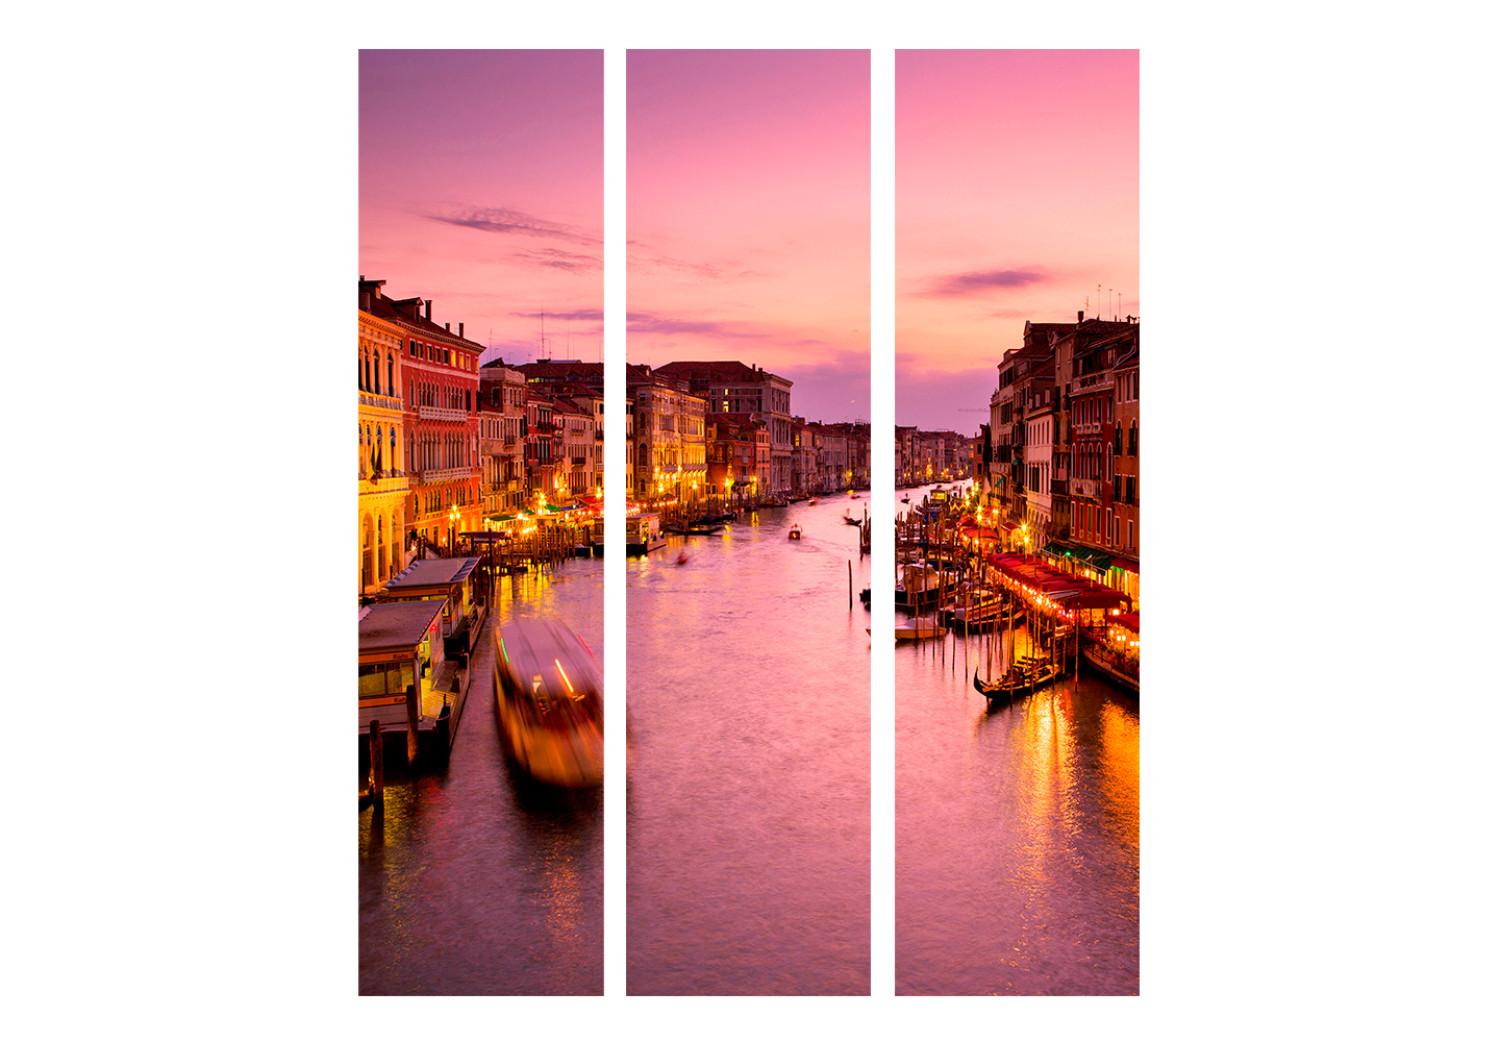 Biombo City of lovers, Venice by night [Room Dividers]